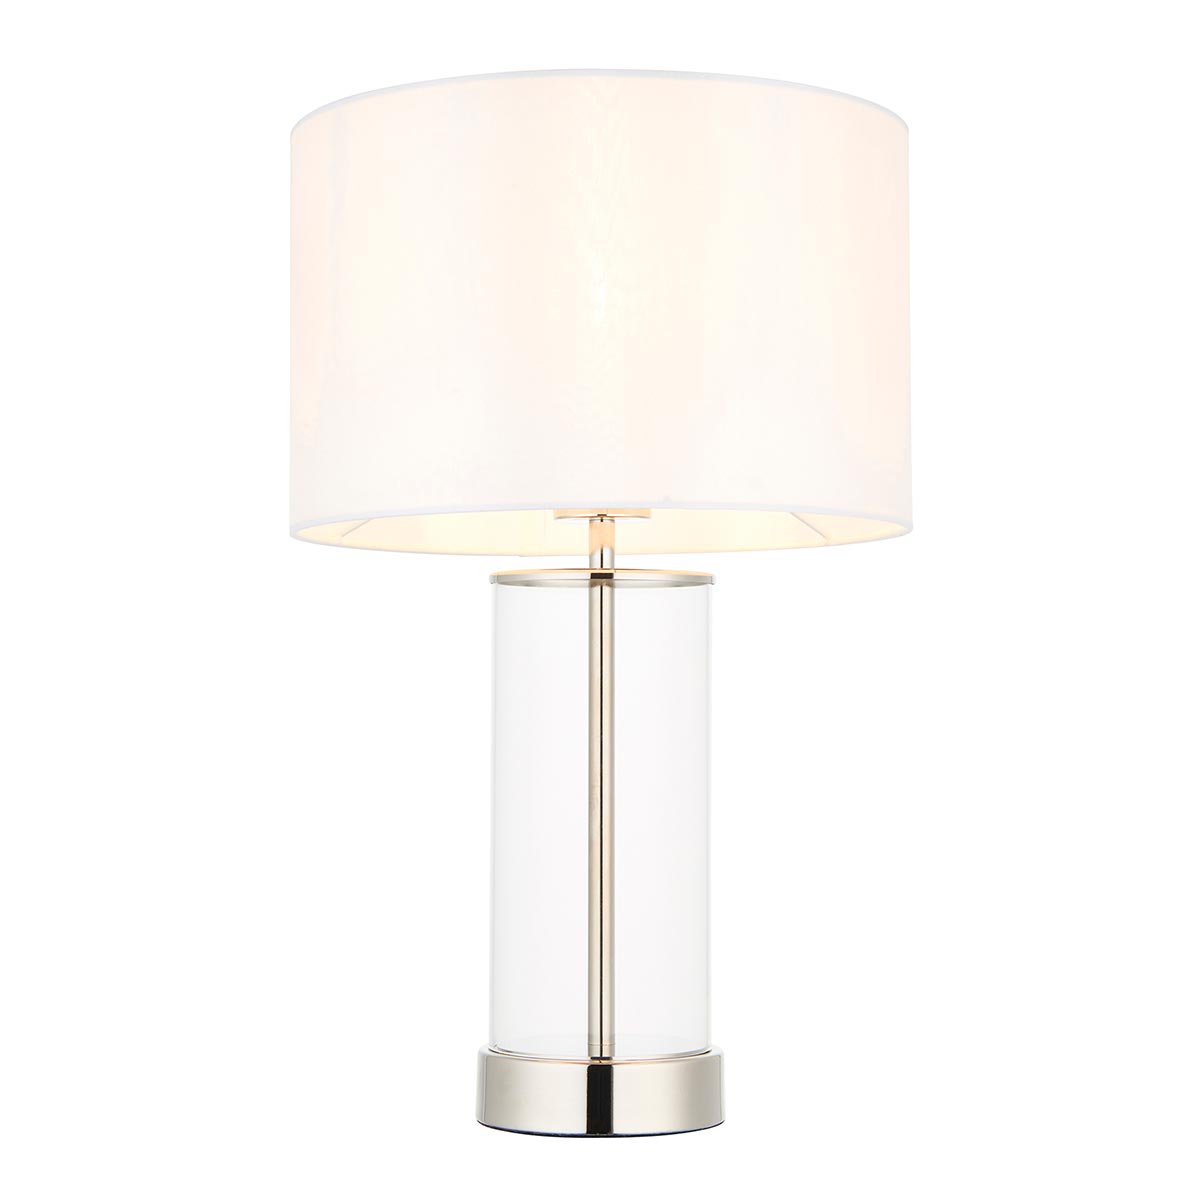 Lessina Small Touch Dimmer Table Lamp Polished Nickel